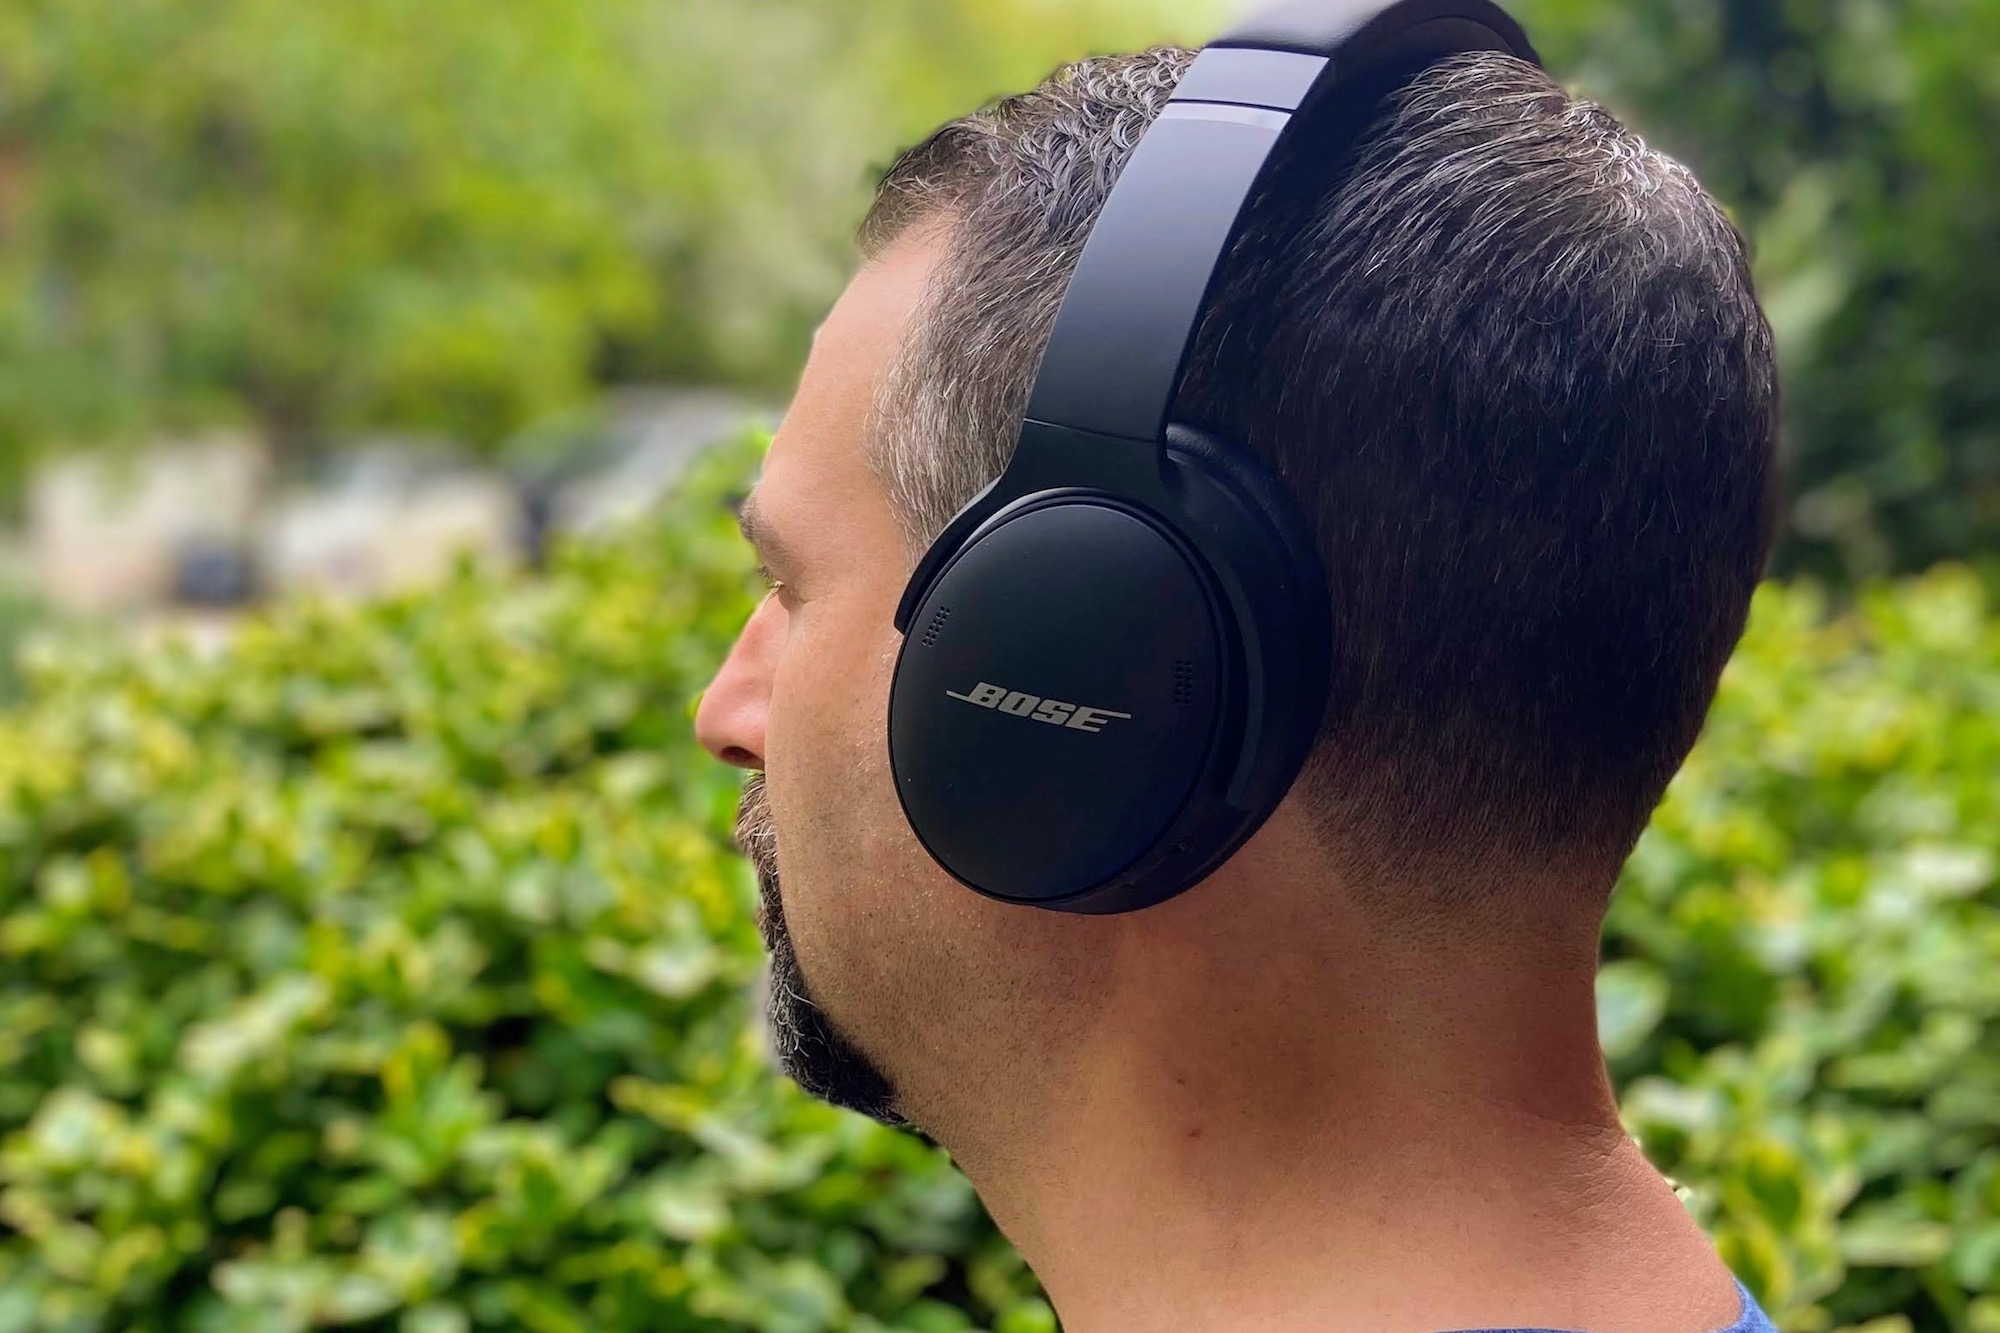 Bose QuietComfort 45 pricing leaks with two colour options to